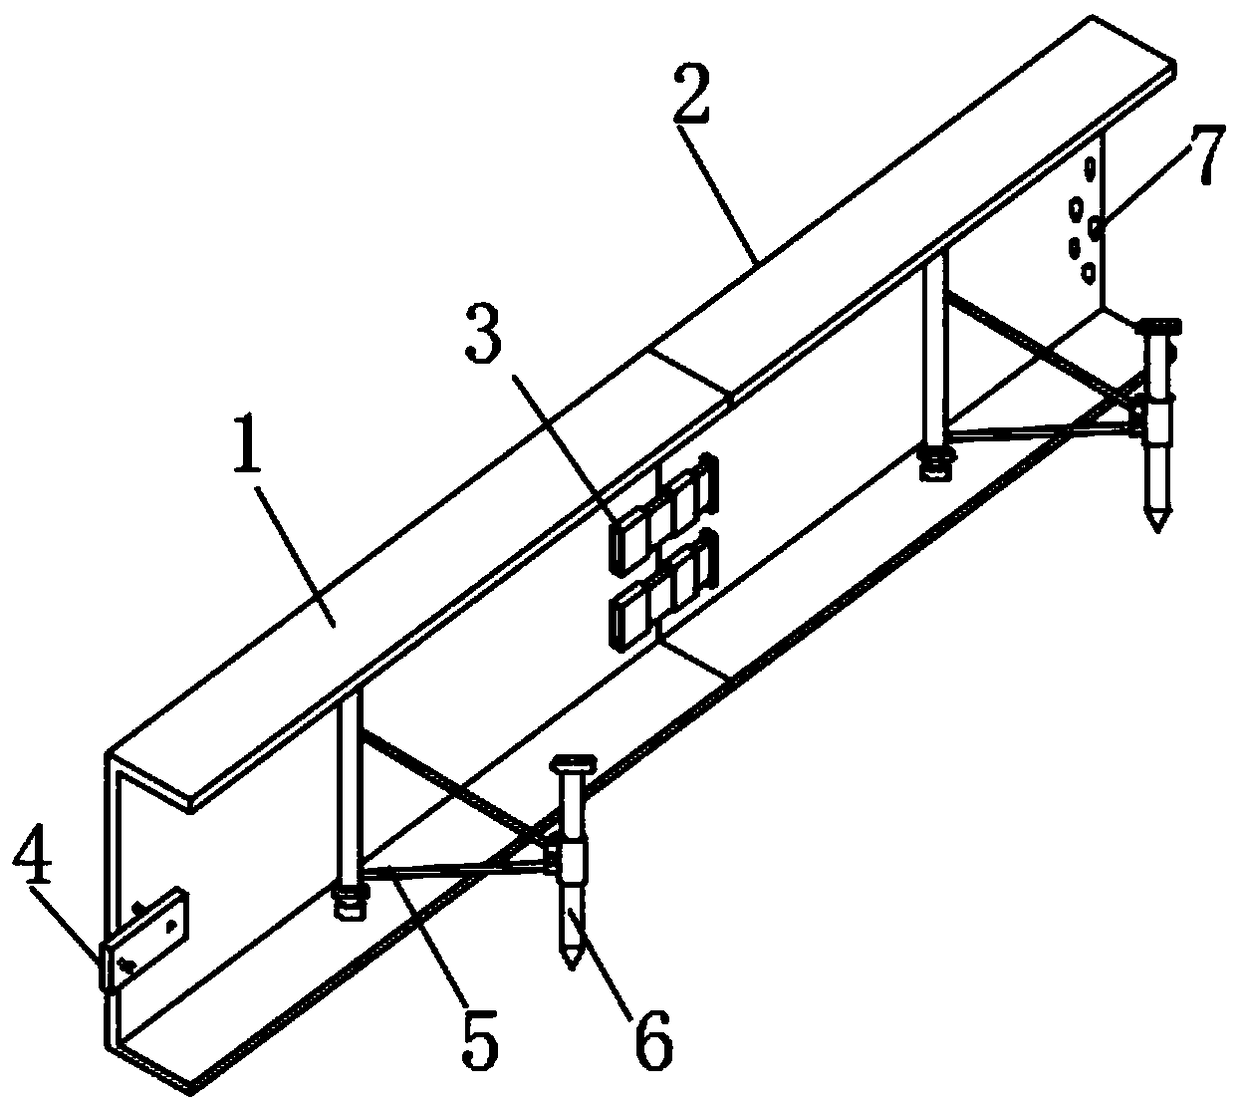 Connecting adjusting structure of side formworks for road construction